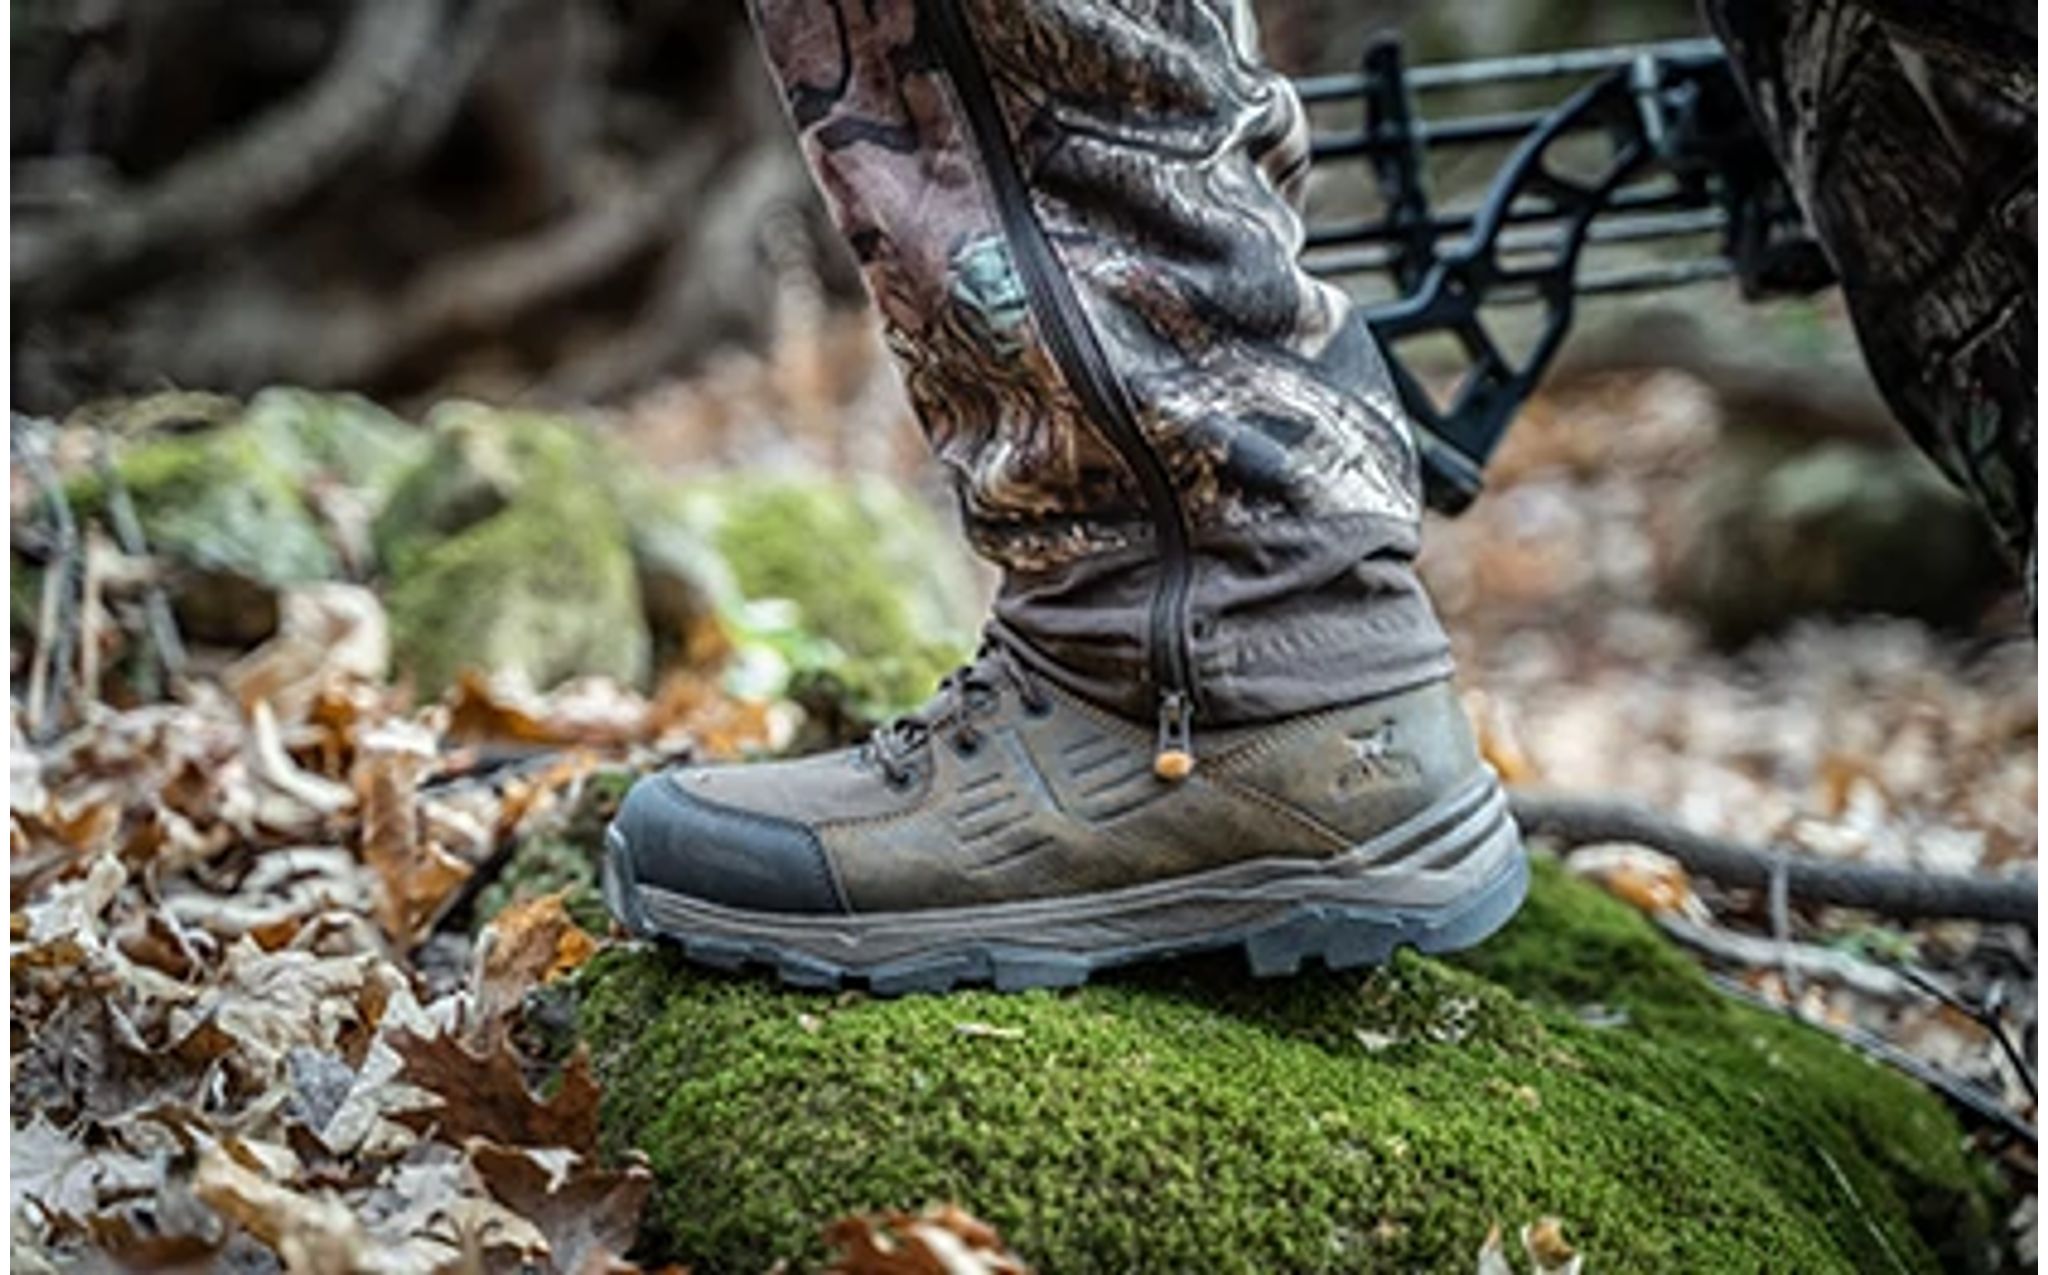 Irish Setter | Purpose-Built Work Boots and Hunting Boots for Men